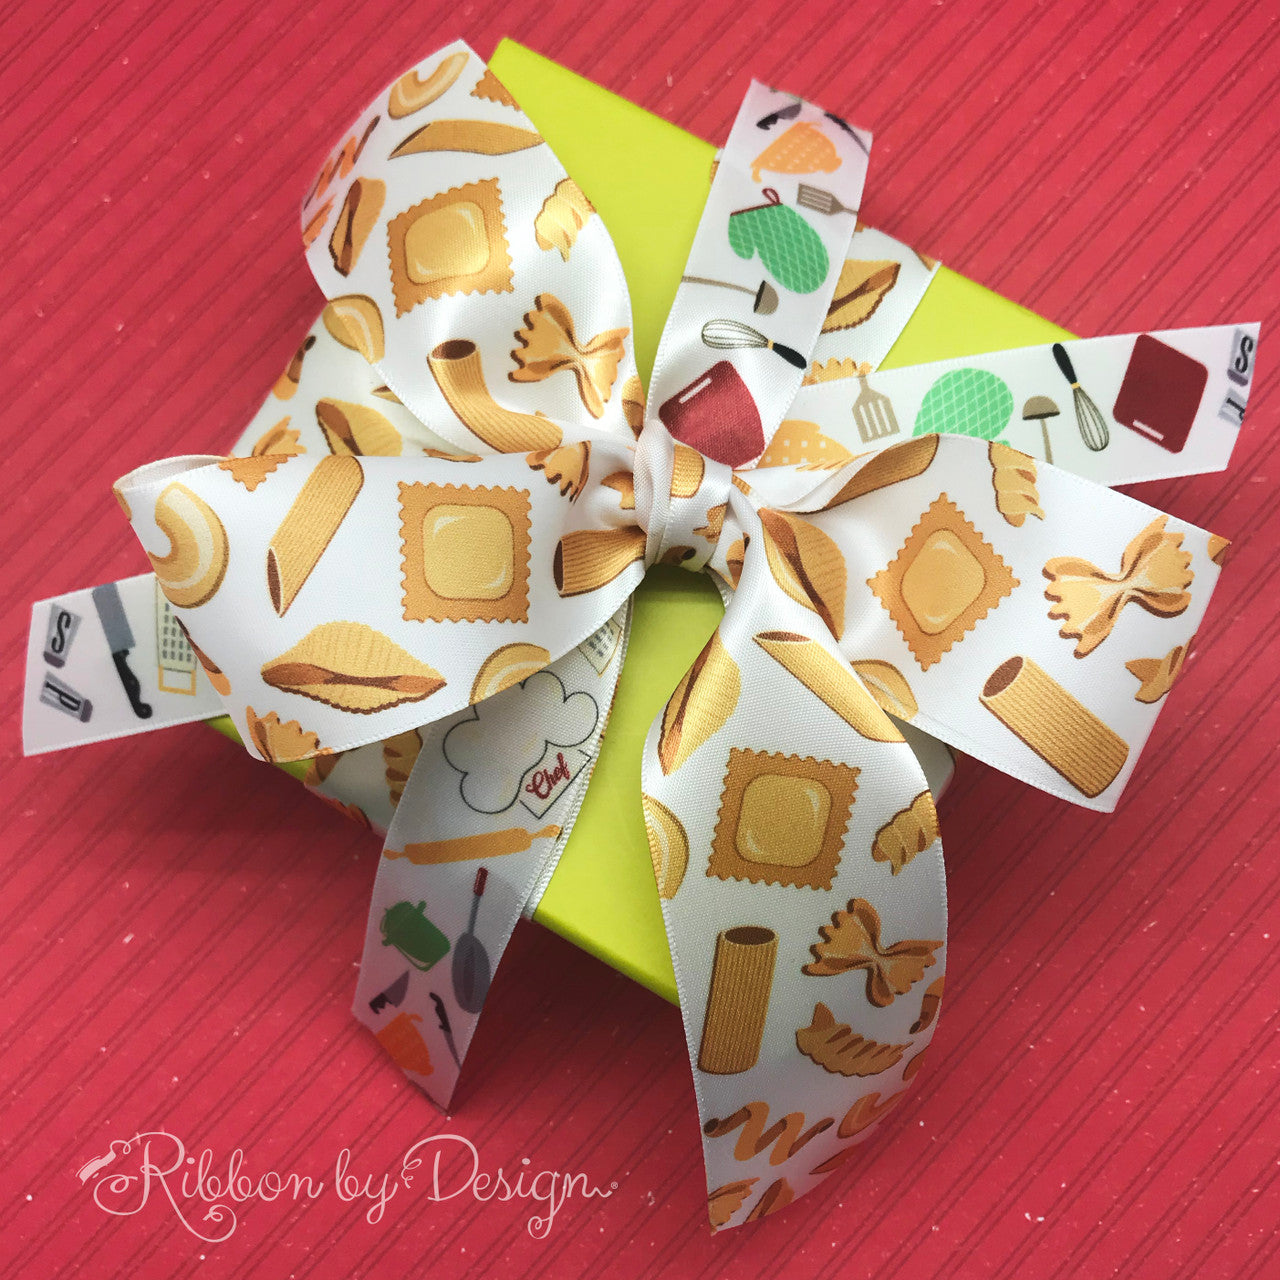 Mix and match our pasta ribbon with our Chef themed ribbon to make a wonderful gift presentation for your foodie friends!